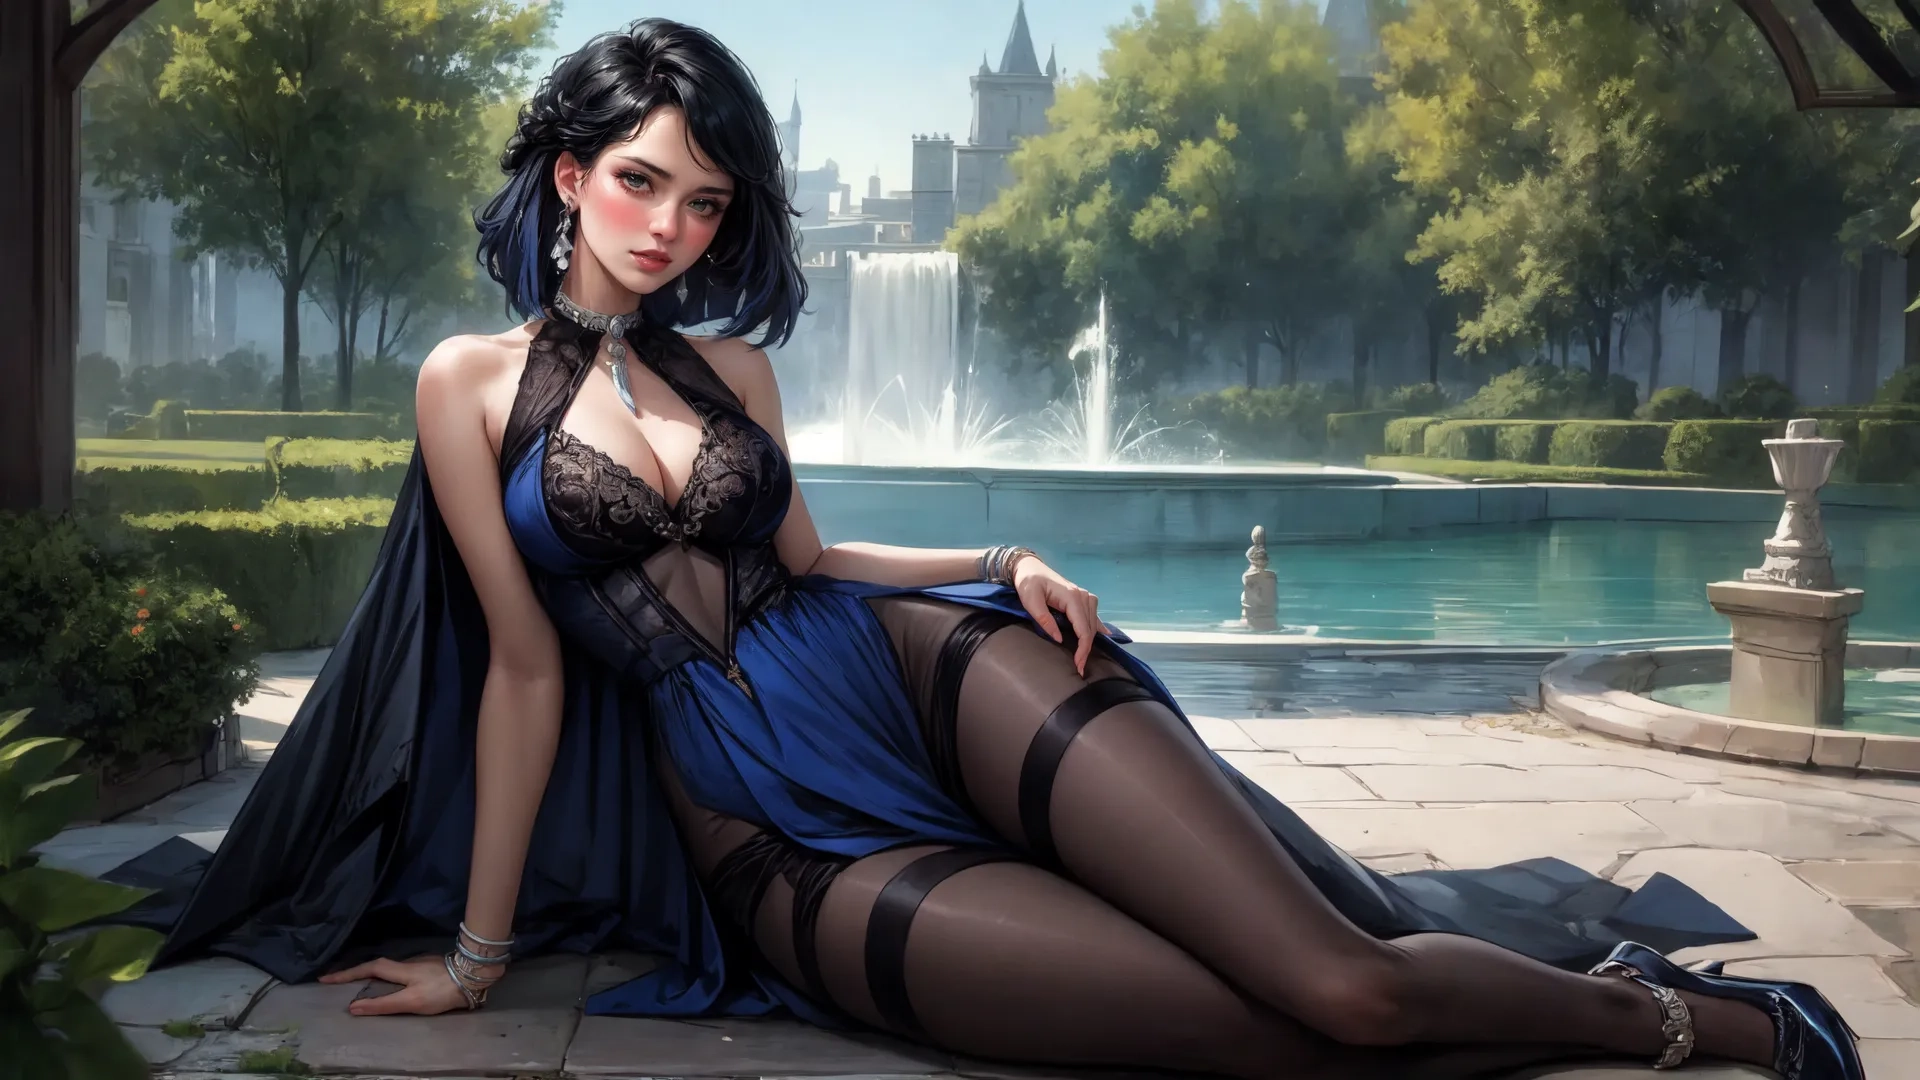 an illustration of a woman in blue and black lingerie sitting on a wall by the water surface and holding up her foot stockings,
